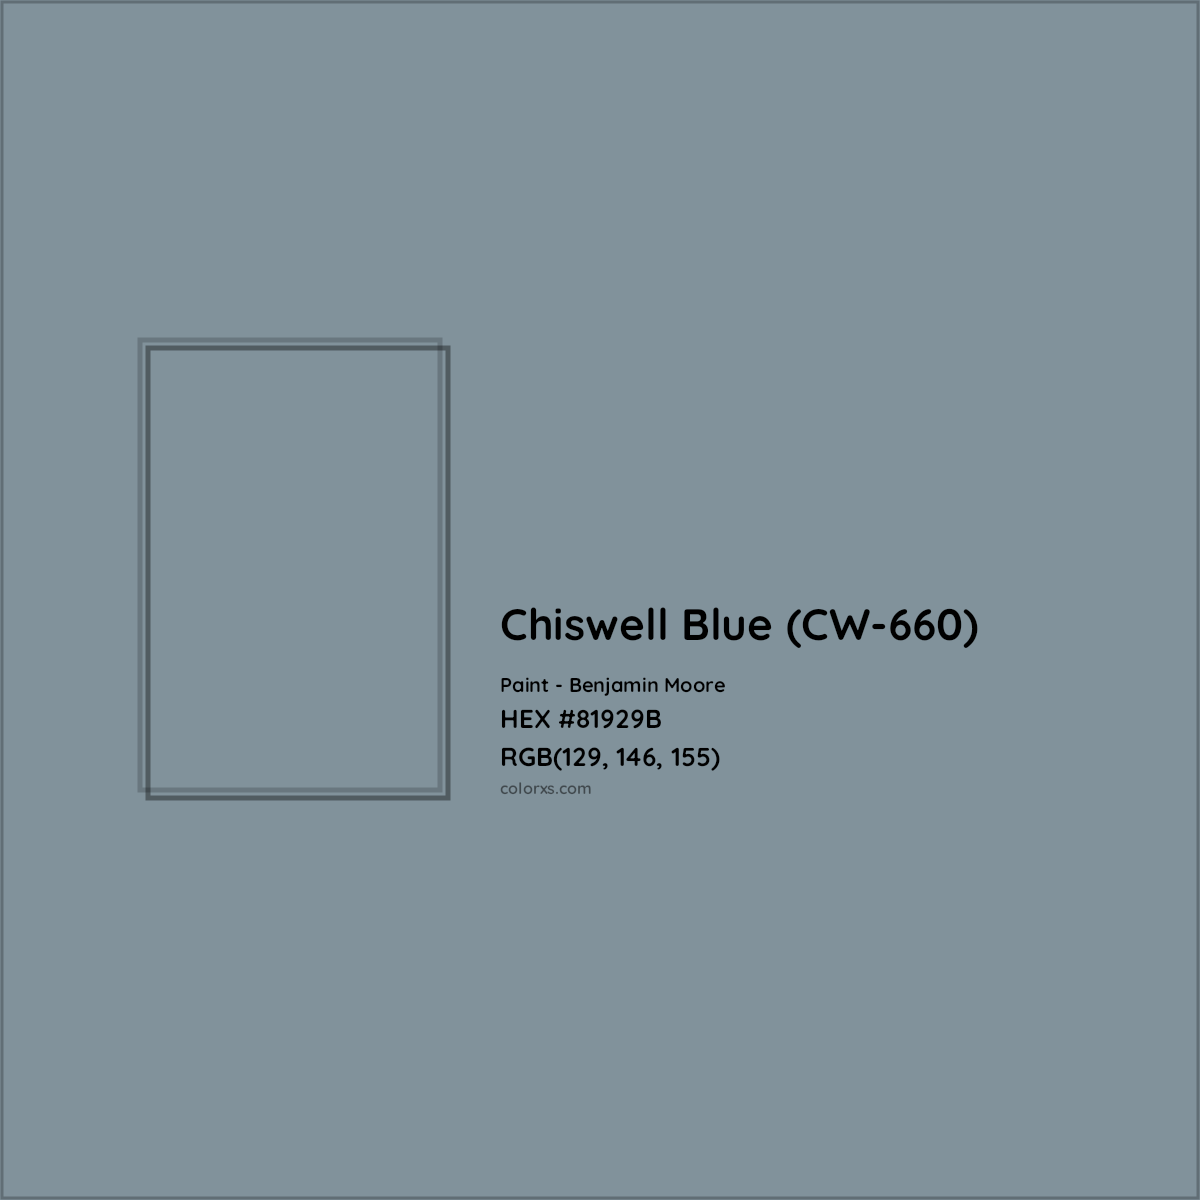 HEX #81929B Chiswell Blue (CW-660) Paint Benjamin Moore - Color Code